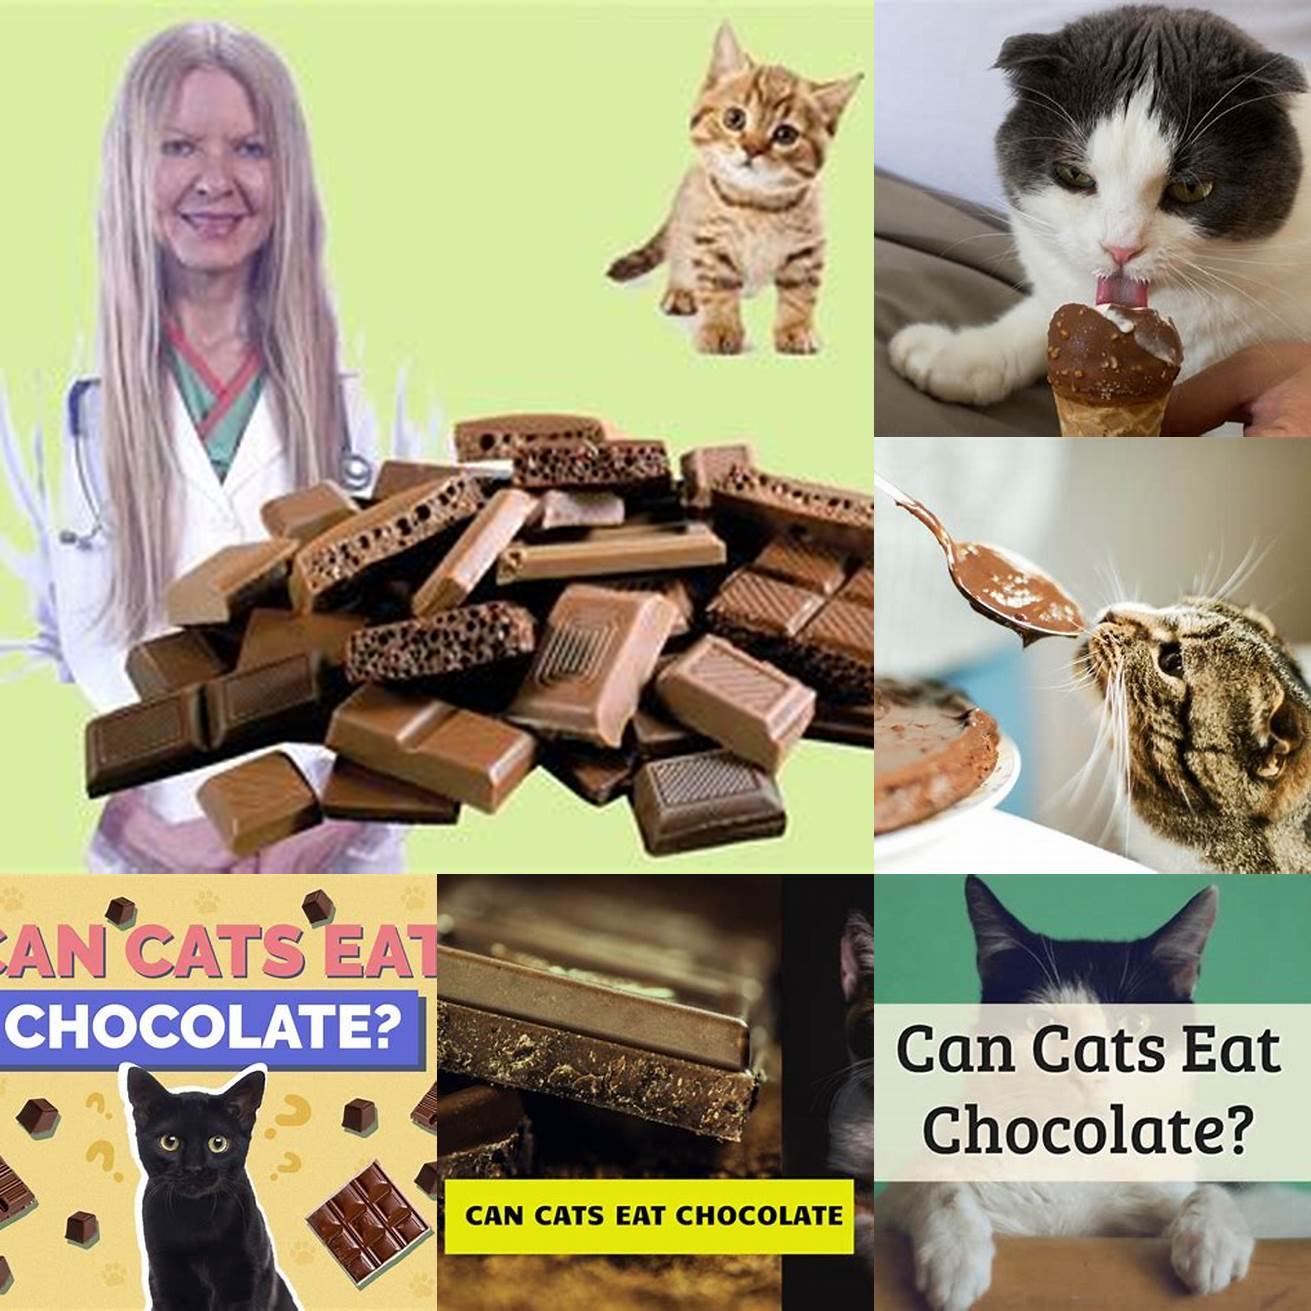 Q Can cats eat chocolate